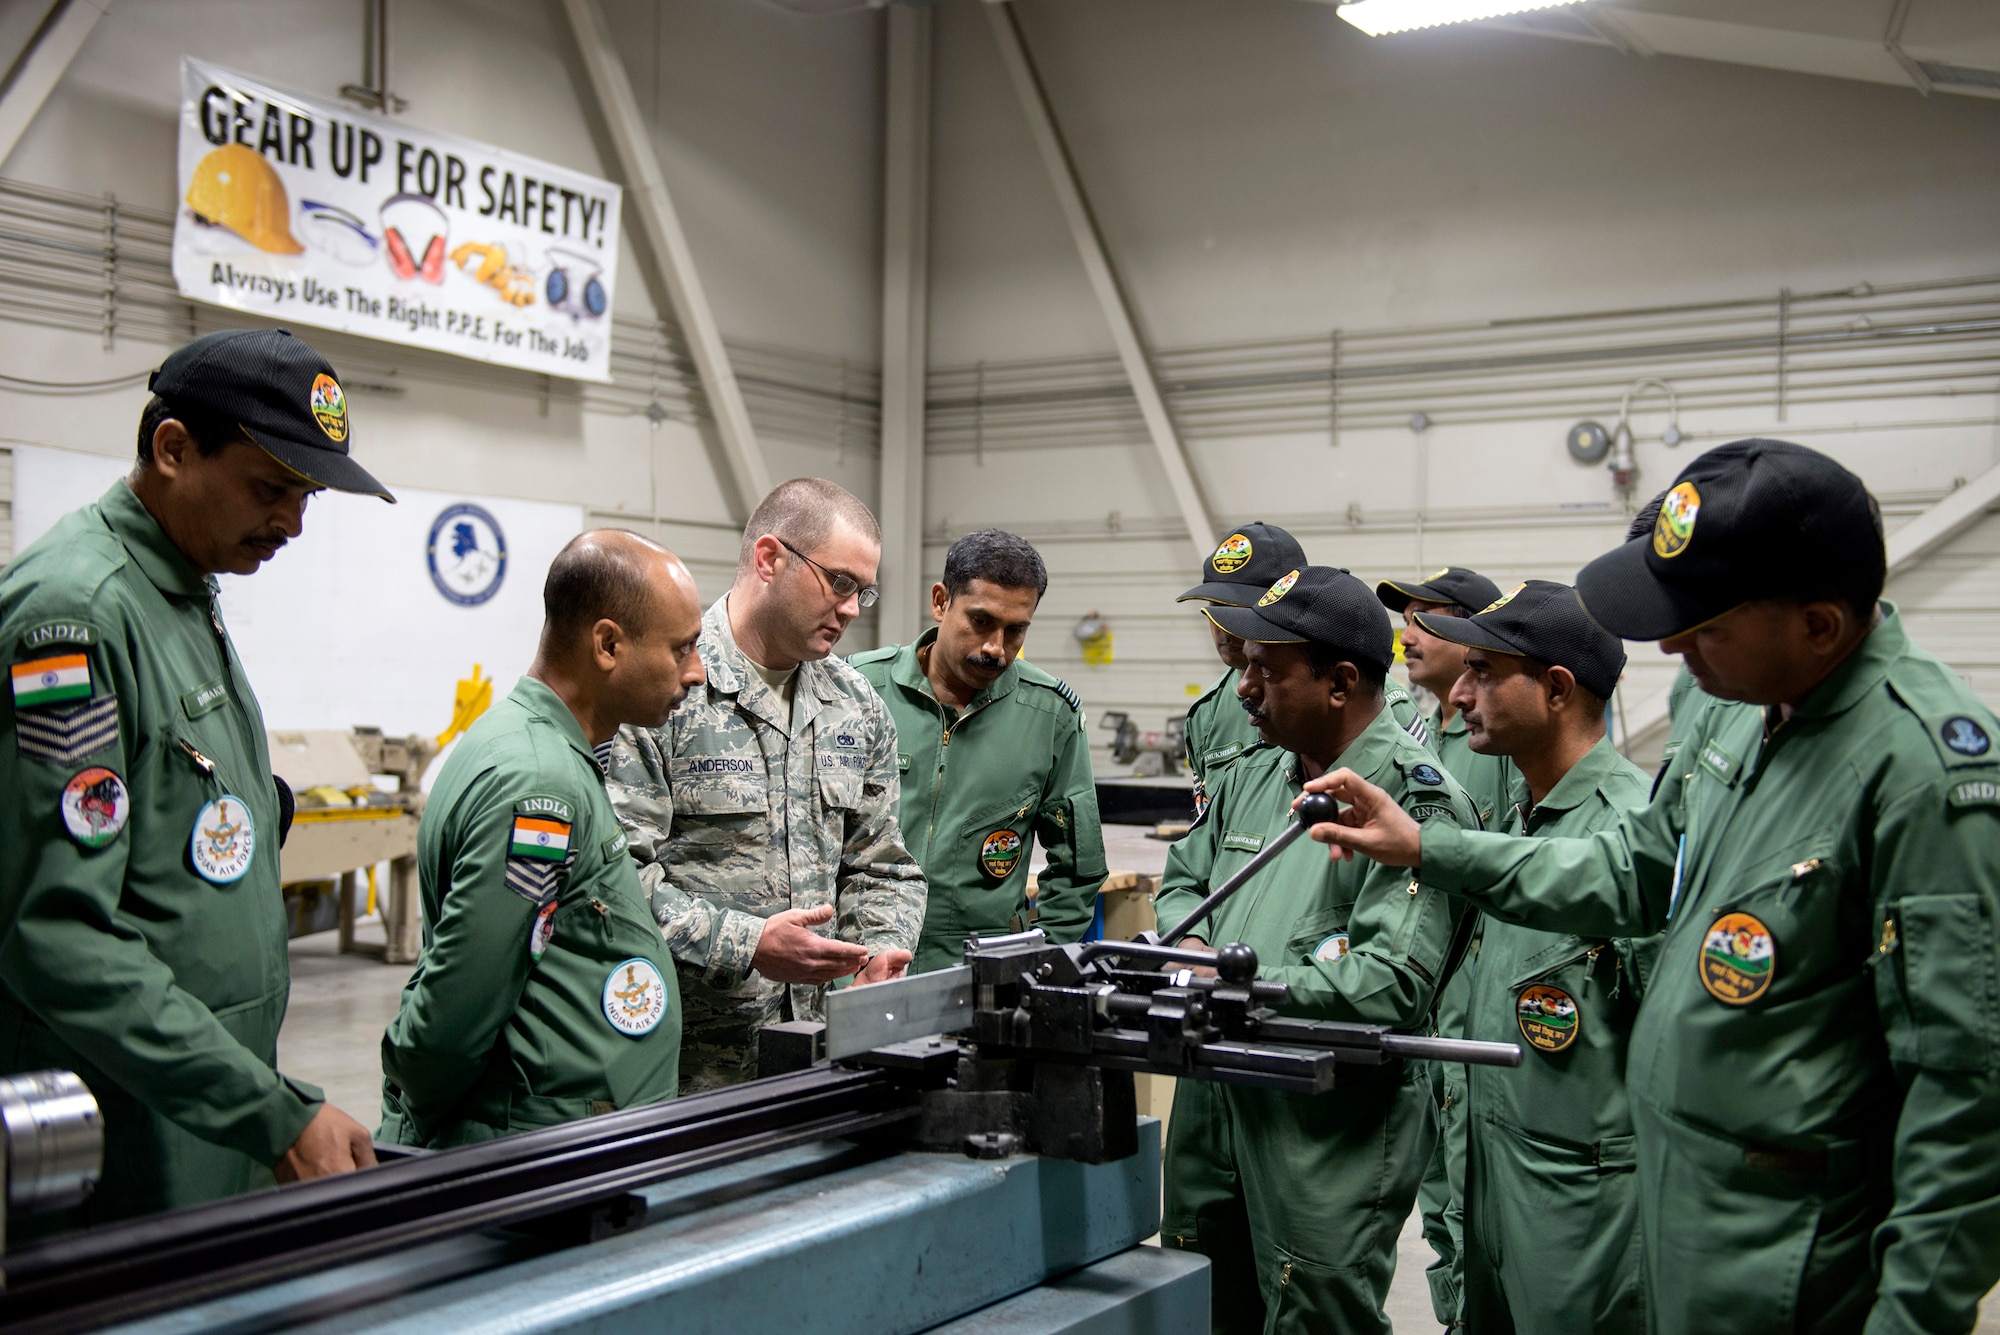 U.S. Air Force Technical Sergeant James Anderson, 354th Maintenance Squadron, provides insight into sheet metal operations to Airman with the Indian Air Force, here, May 10, 2016. (U.S. Air Force photo by Staff Sgt. Ashley Taylor)